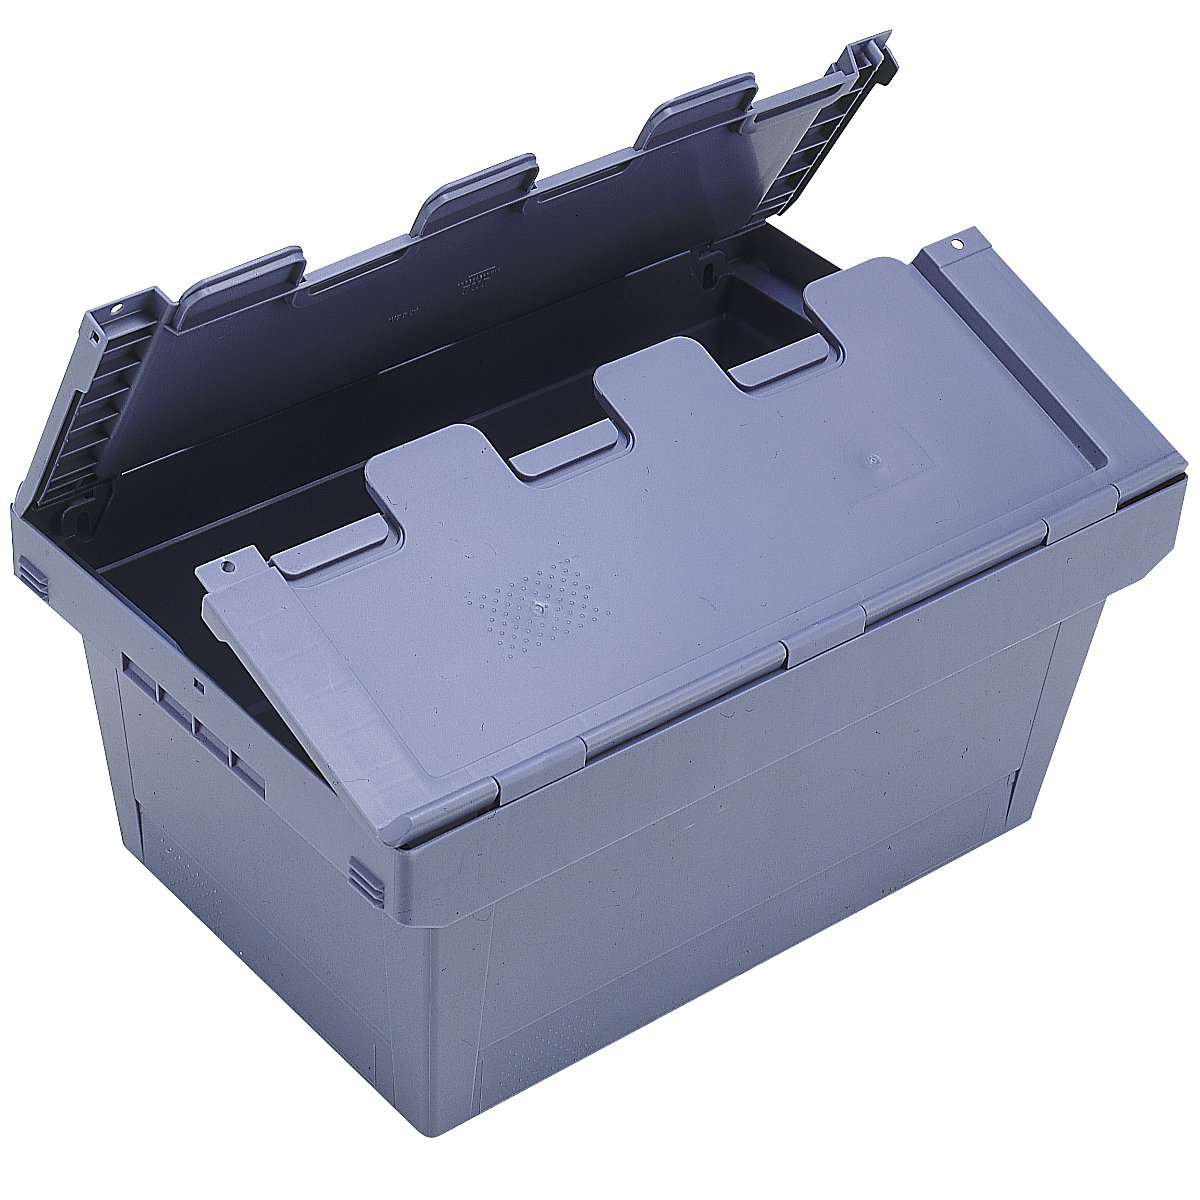 Reusable stacking container with folding lid - BITO